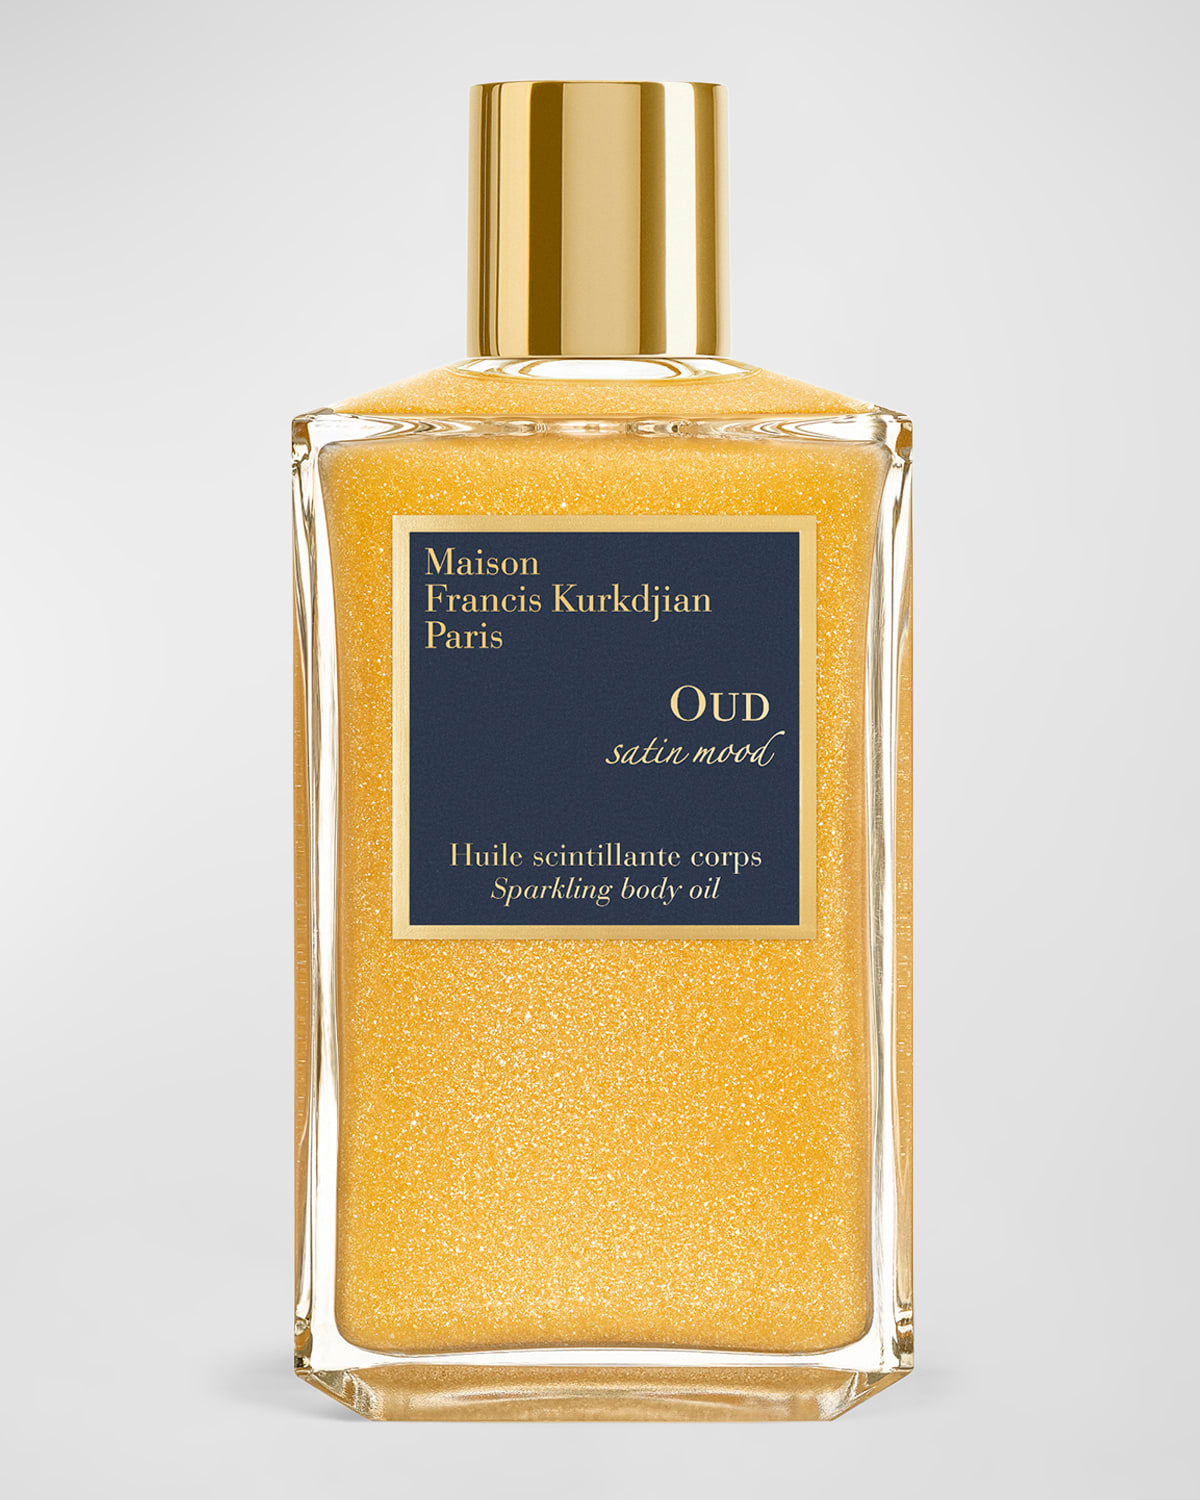 OUD Satin Mood Scented Sparkling Body Oil, 6.7 oz.